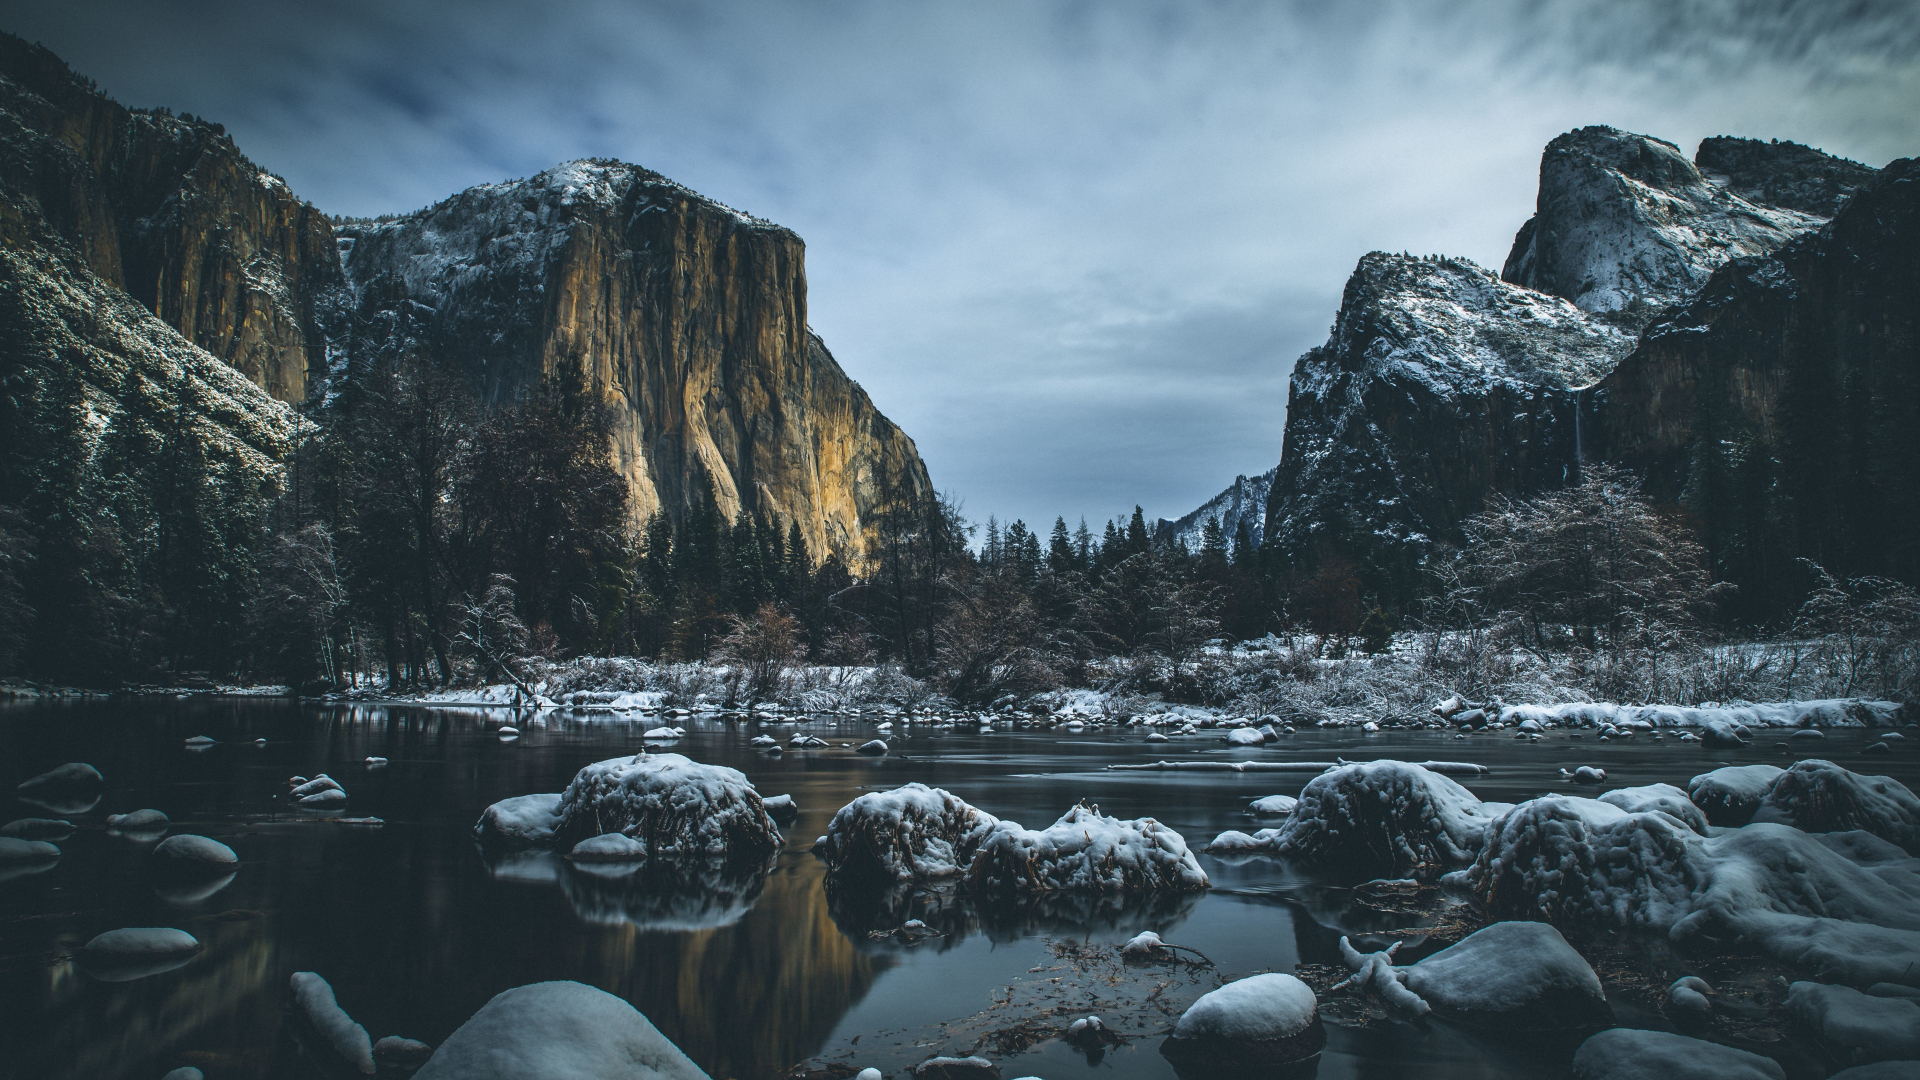 Download wallpaper 1920x1080 national park, yosemite valley, river,  mountains, stones, full hd, hdtv, fhd, 1080p wallpaper, 1920x1080 hd  background, 21272